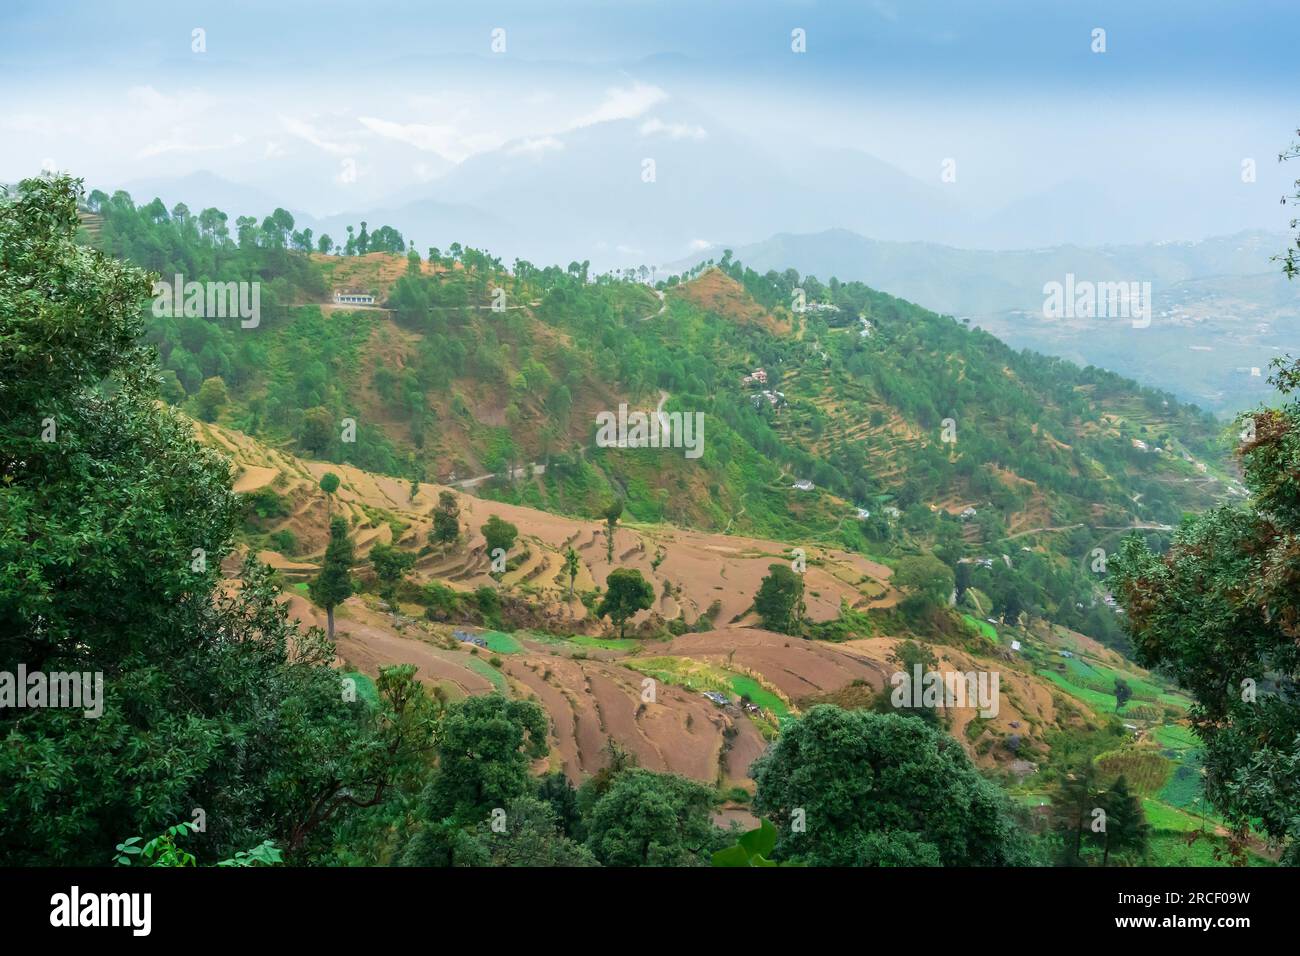 Step agriculture, or terrace agriculture. Steep hills or mountainsides are cut to form level areas for planting of crops. Foggy, misty Himalayas India Stock Photo